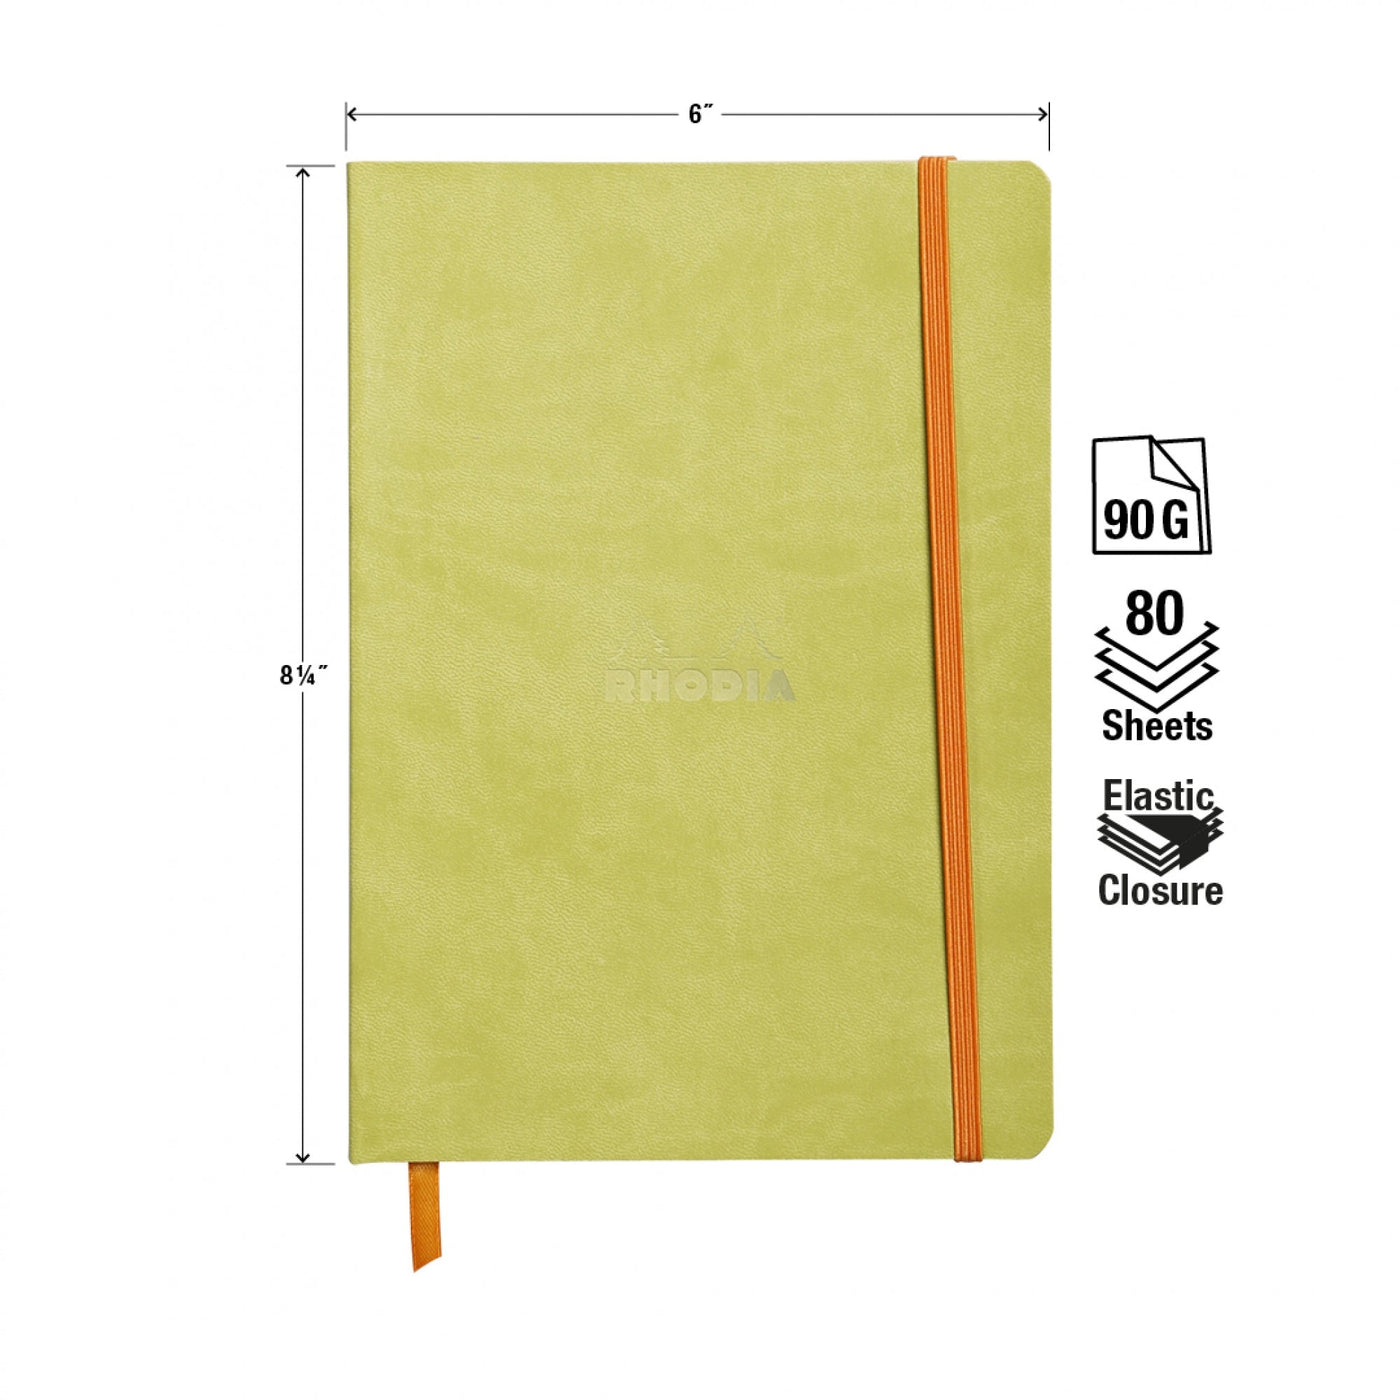 Rhodia Rhodiarama Soft Cover A5 Anise Lined Notebook Measurements